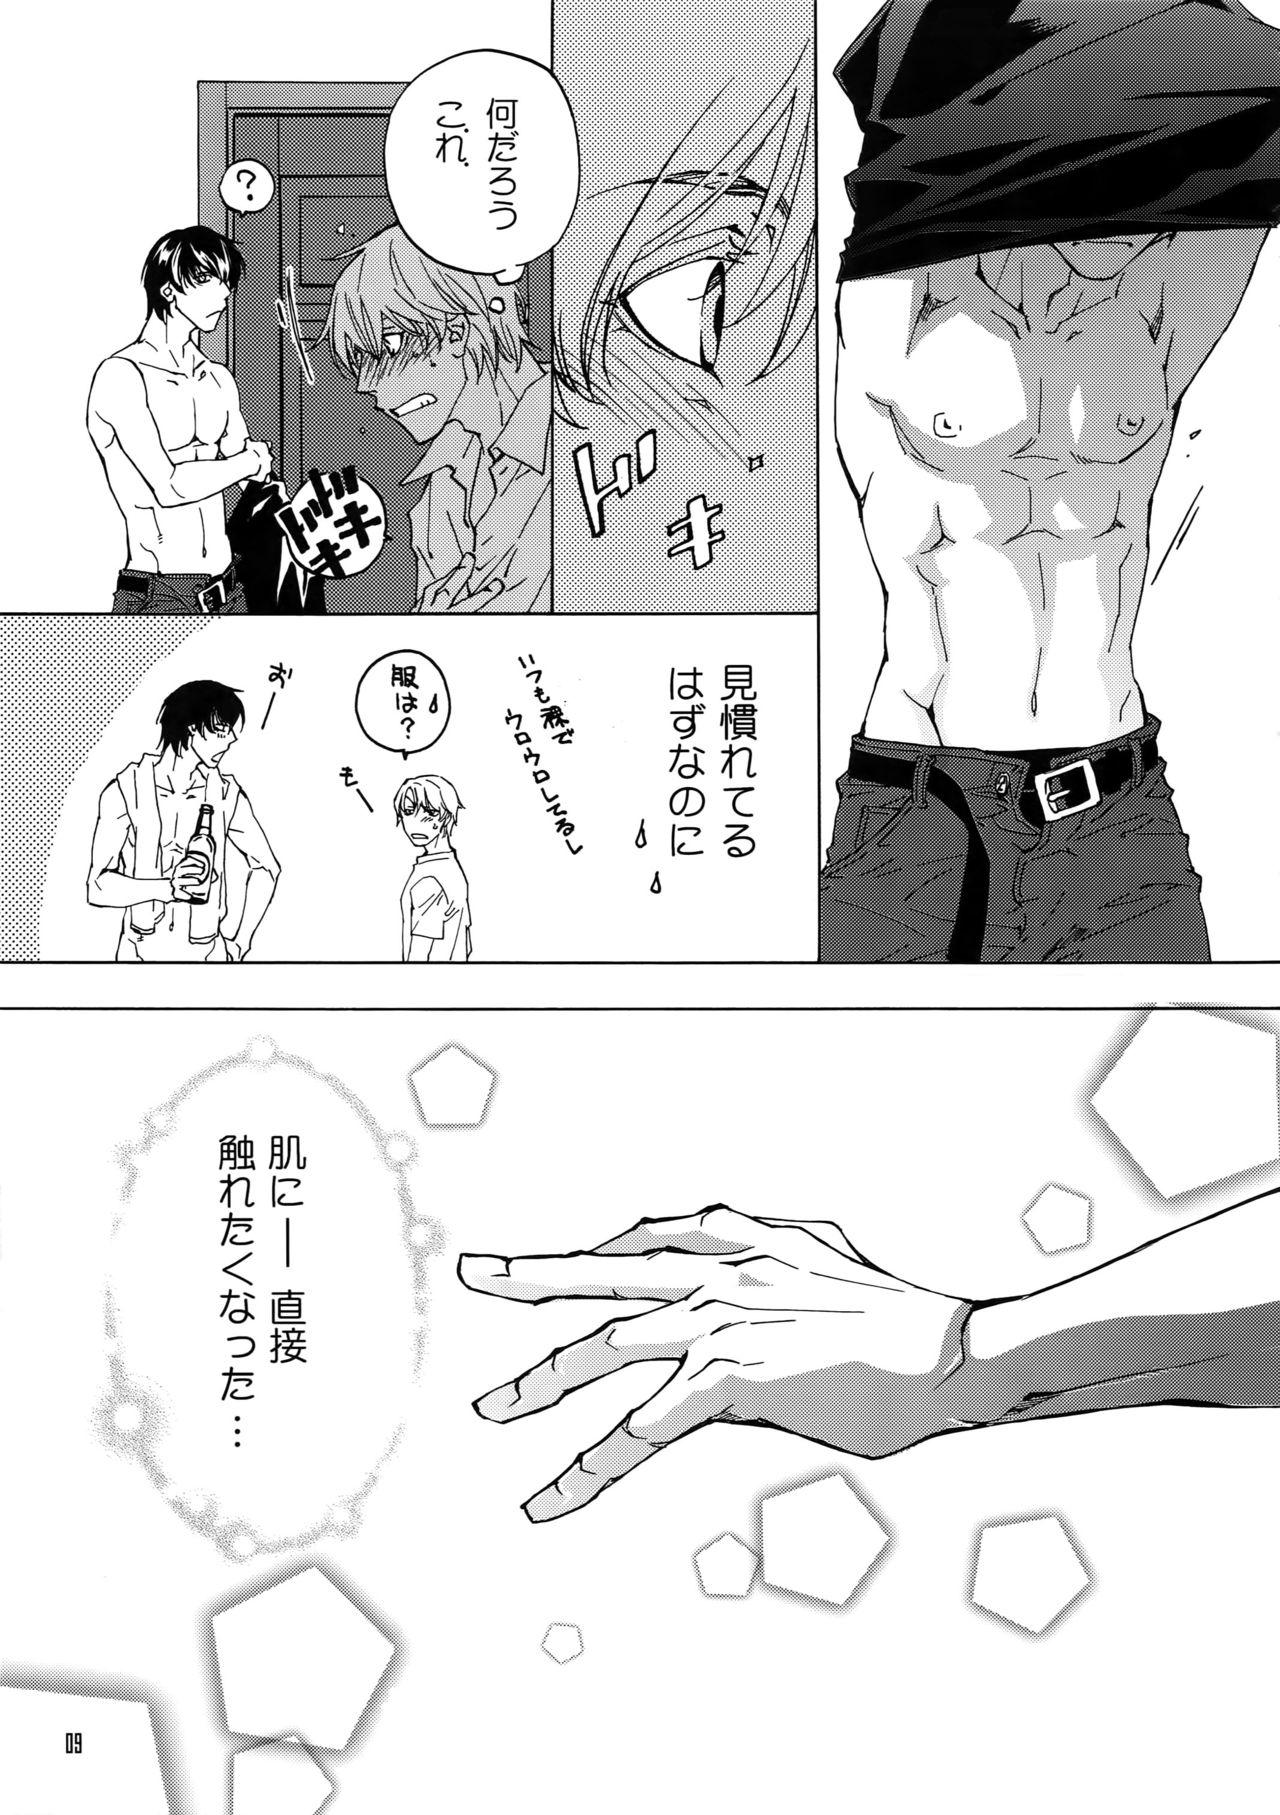 [East End Club (Matoh Sanami)] BACK STAGE PASS 10 page 6 full